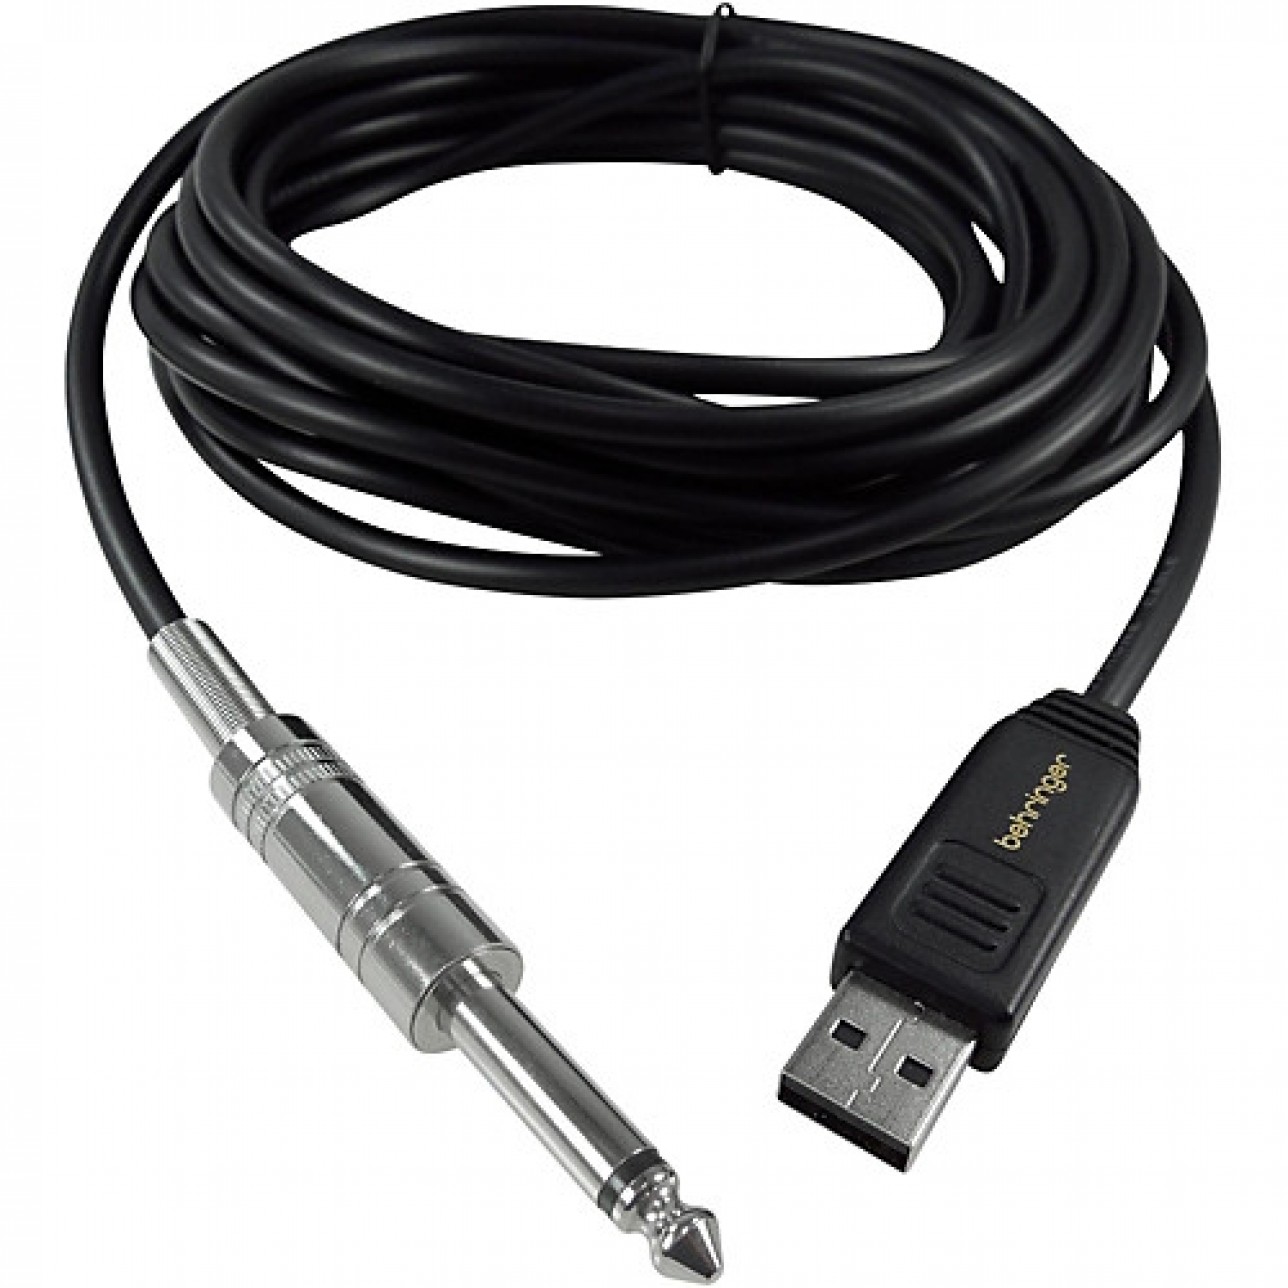 behringer bcd3000 driver usb cable